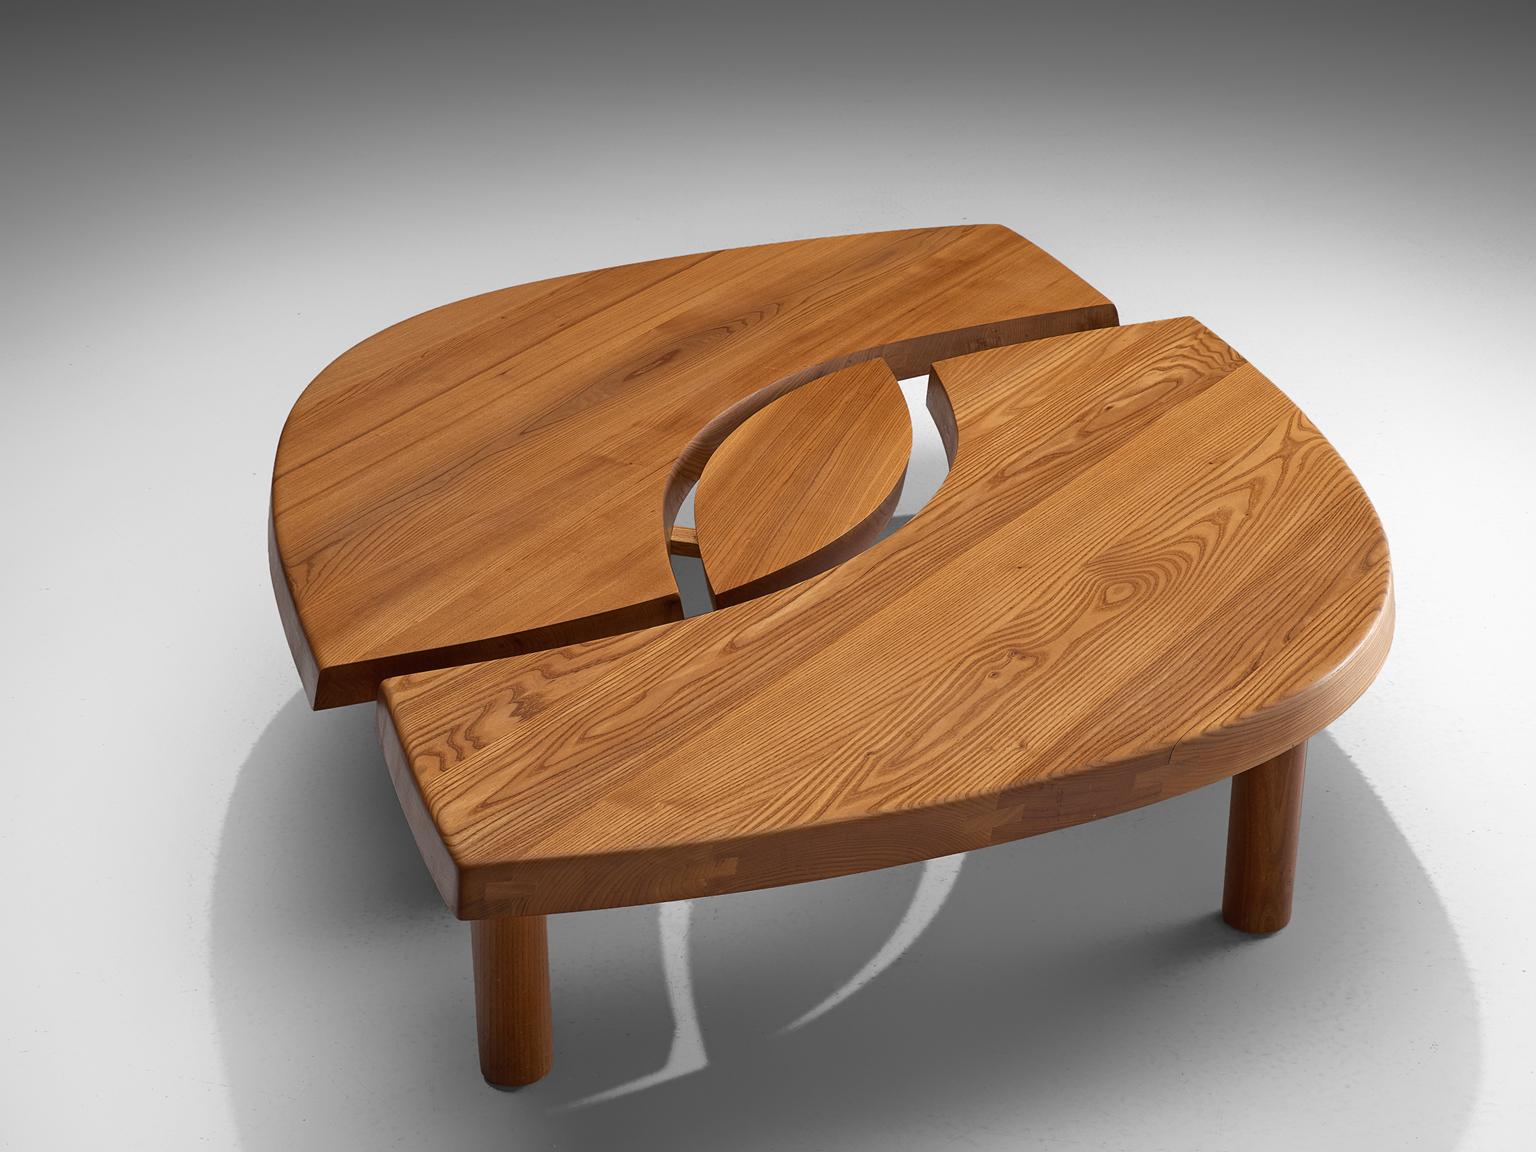 Pierre Chapo, coffee table, model T22C, elm, France, circa 1972.

This beautiful eye-shaped cocktail table is part of the midcentury design collection. The coffee table is designed by the French designer and master woodworker Pierre Chapo